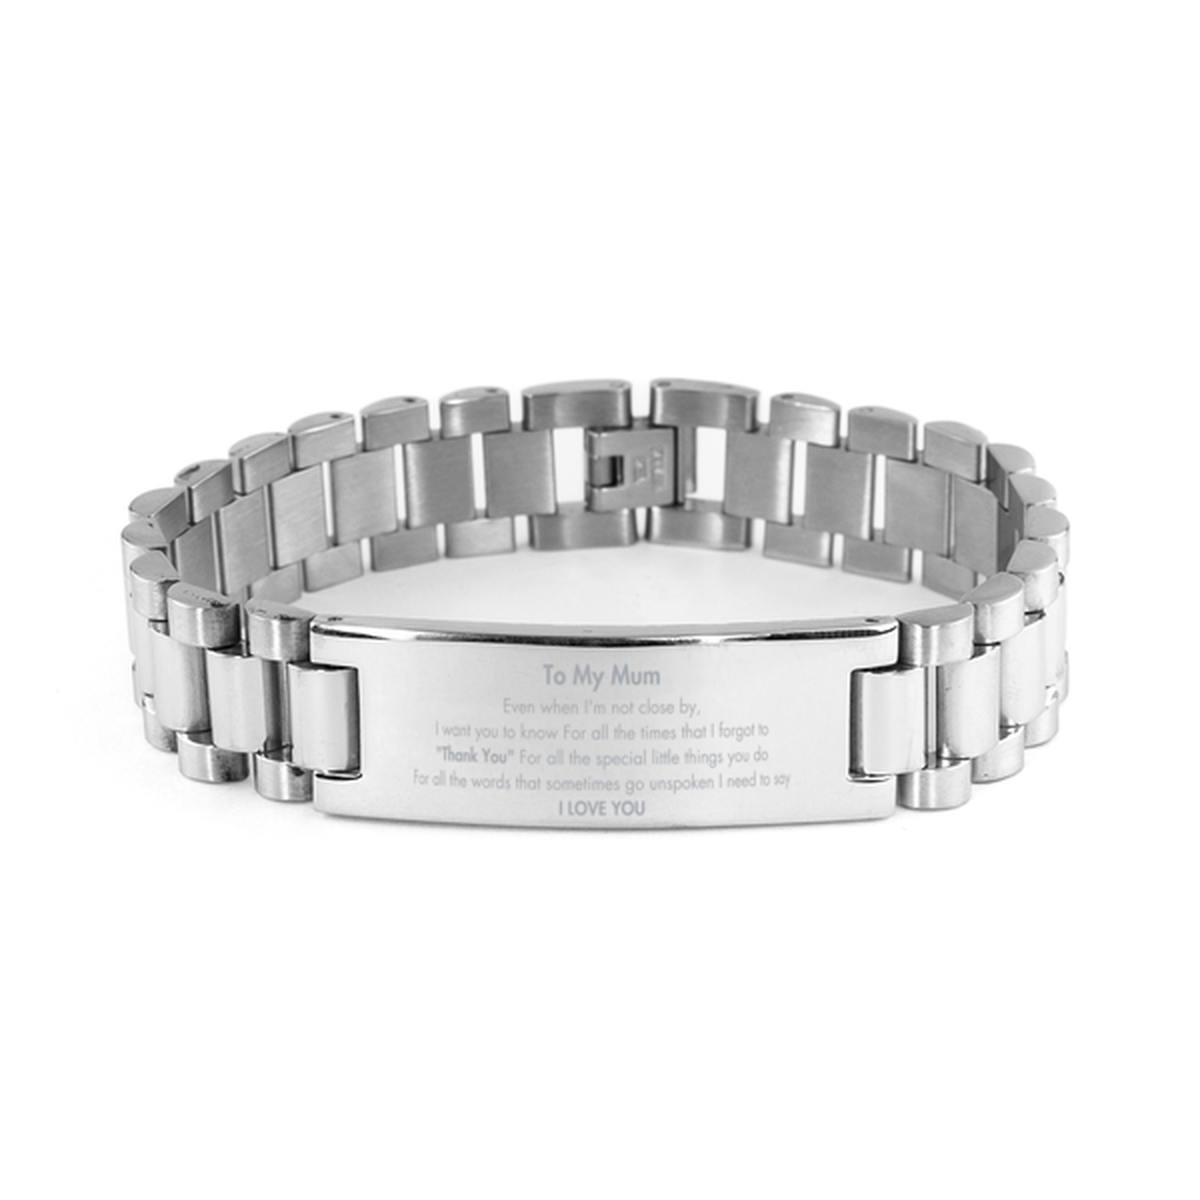 Thank You Gifts for Mum, Keepsake Ladder Stainless Steel Bracelet Gifts for Mum Birthday Mother's day Father's Day Mum For all the words That sometimes go unspoken I need to say I LOVE YOU